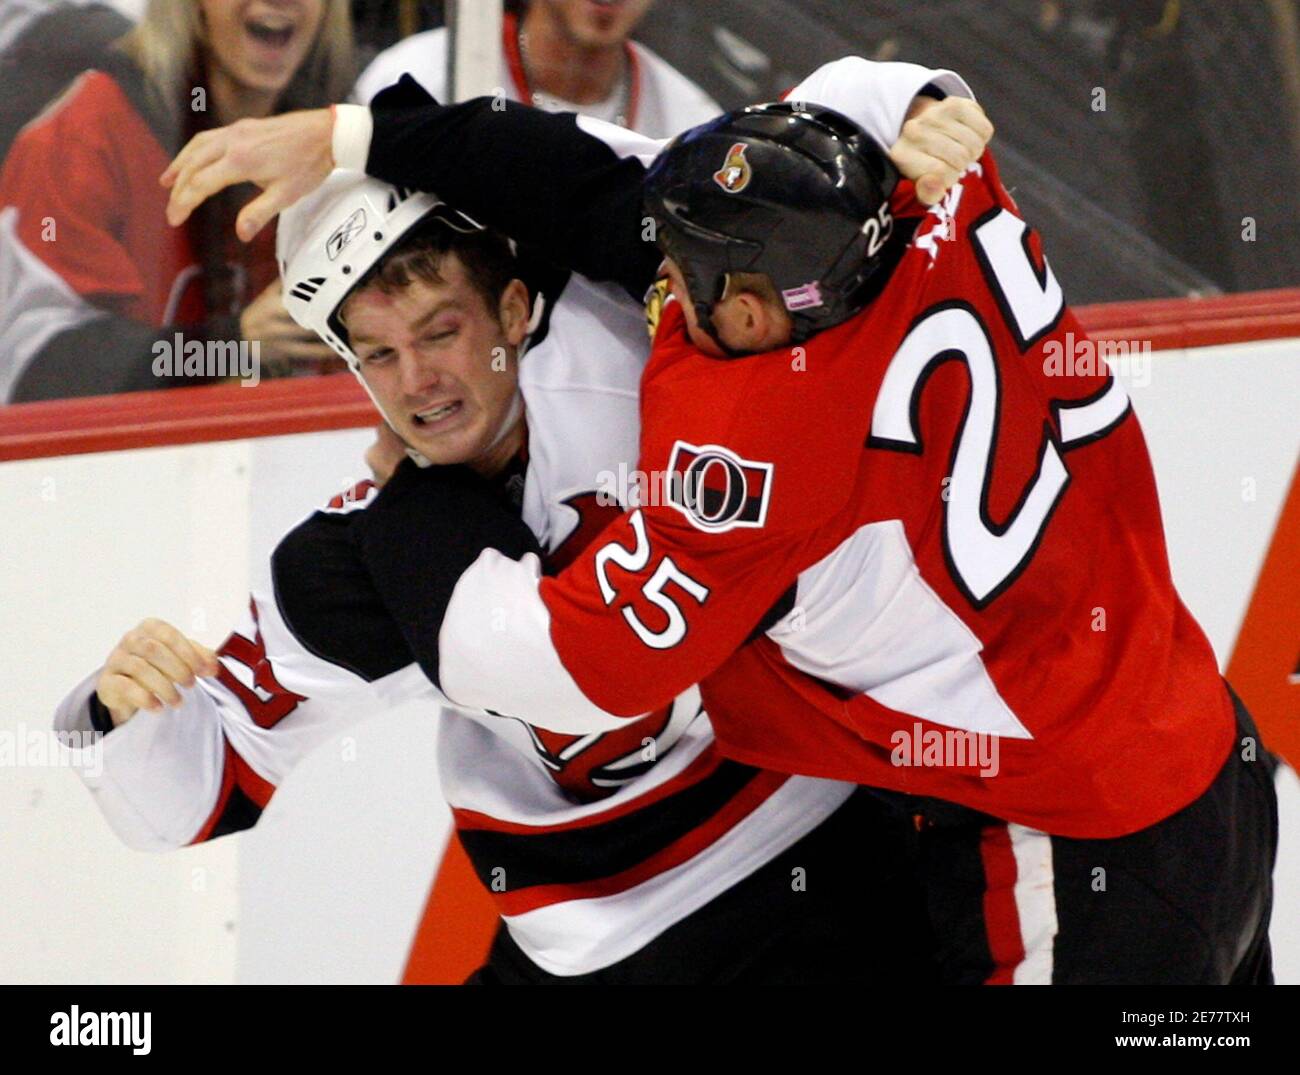 New Jersey Devils' David Clarkson (L) fights with Ottawa Senators' Chris Neil during the second period of their NHL hockey game in Ottawa October 8, 2007.        REUTERS/Chris Wattie   (CANADA) Stock Photo